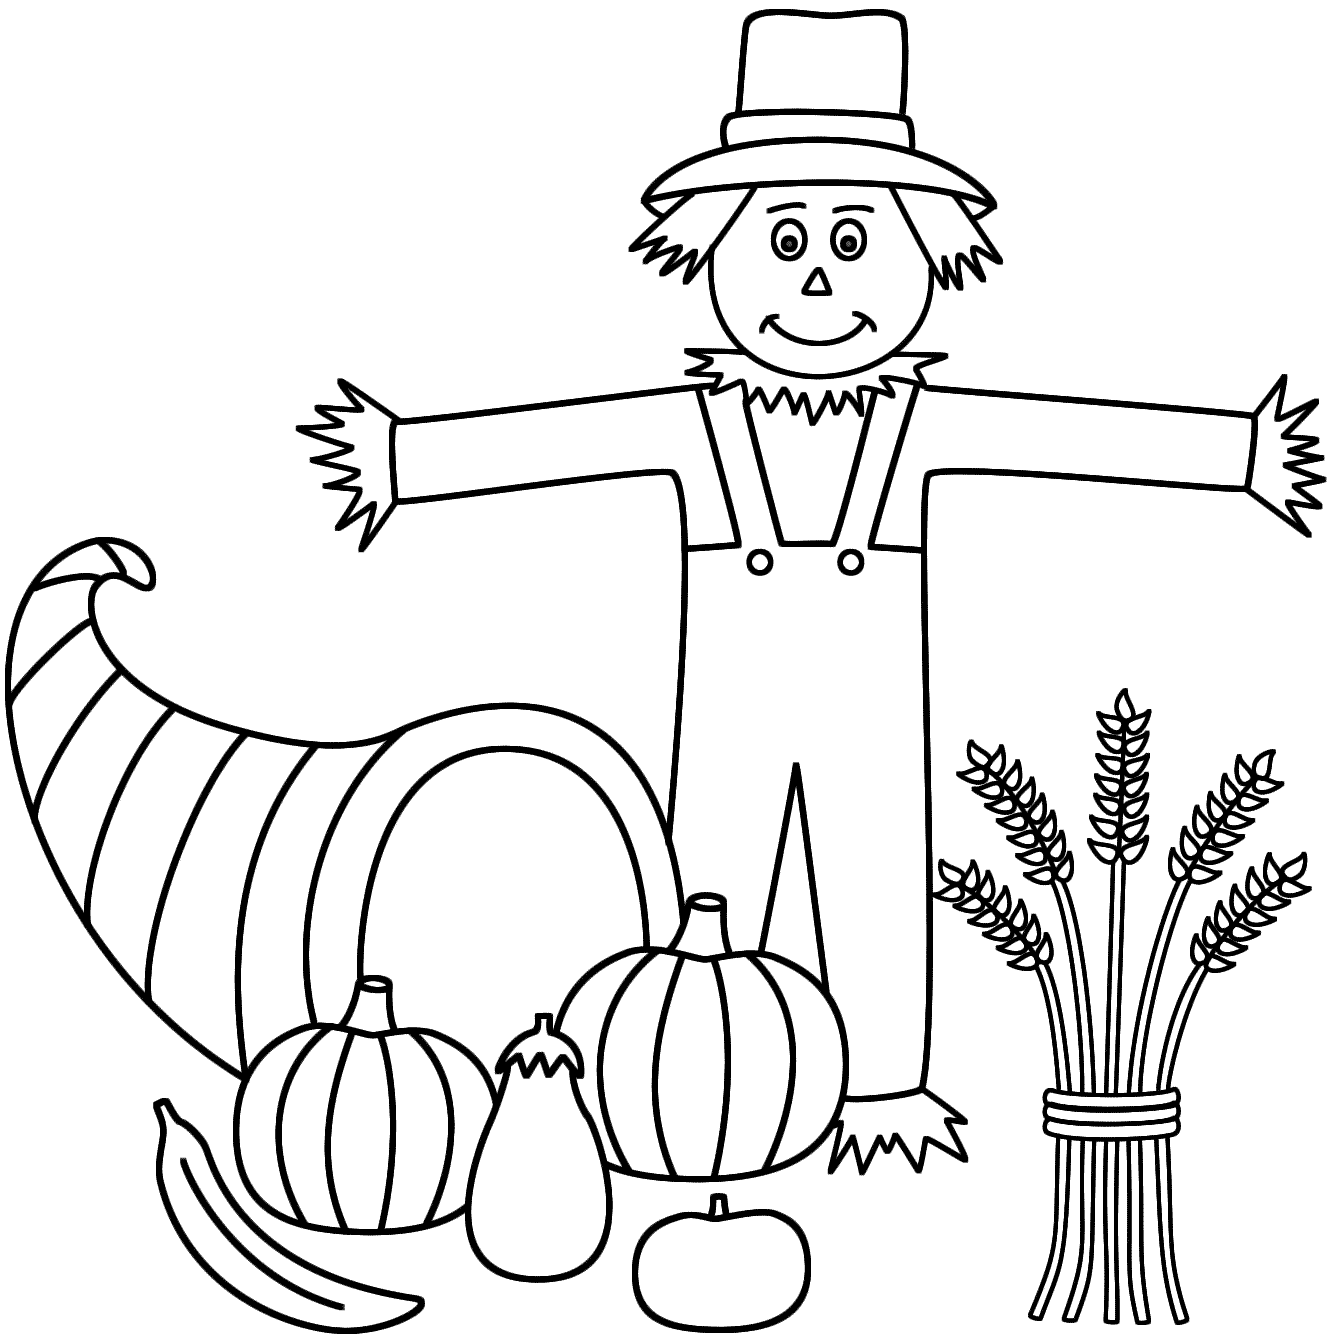 Horn of Plenty with a scarecrow - Coloring Page (Thanksgiving)